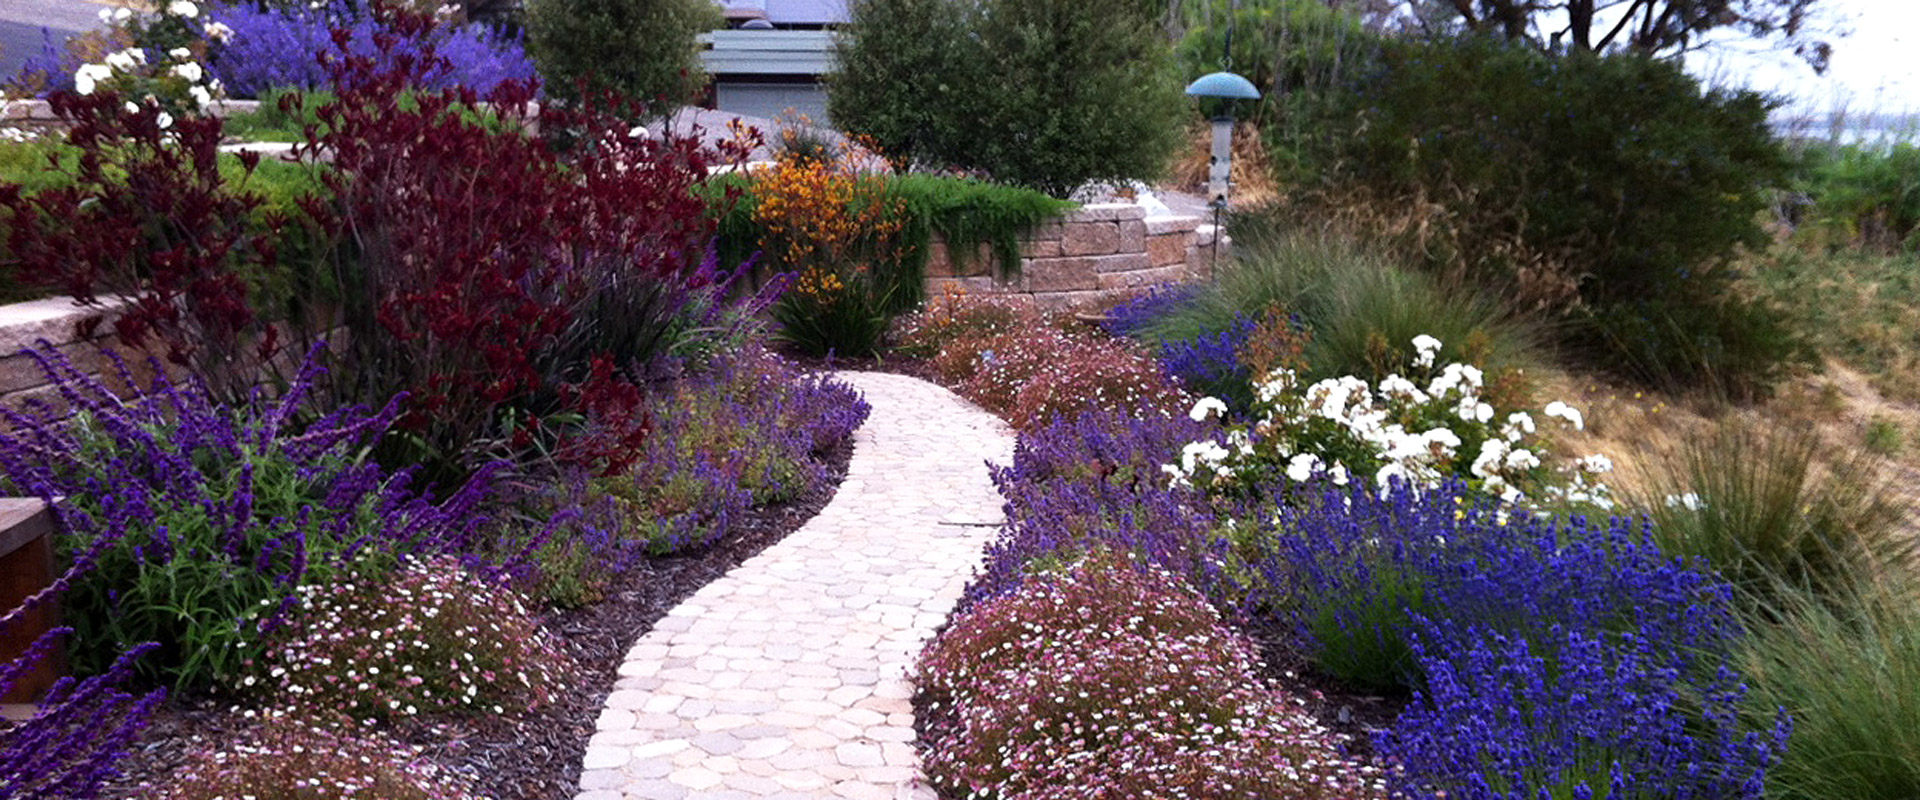 Earthscapes Landscaping Services Path